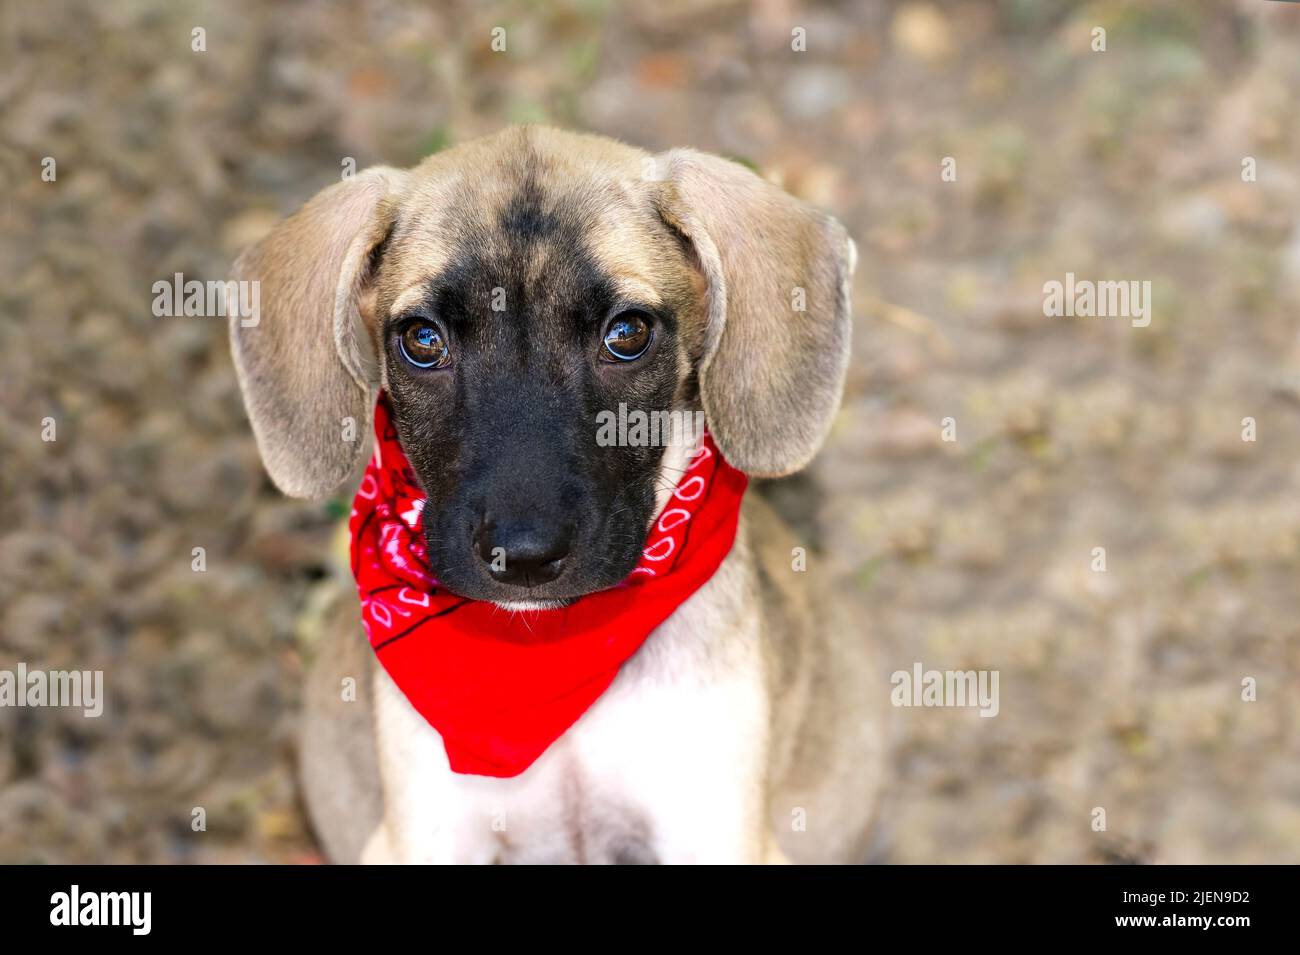 A Cute Shy Looking Adorable Puppy Dog Is Looking Right Into The Camera Stock Photo